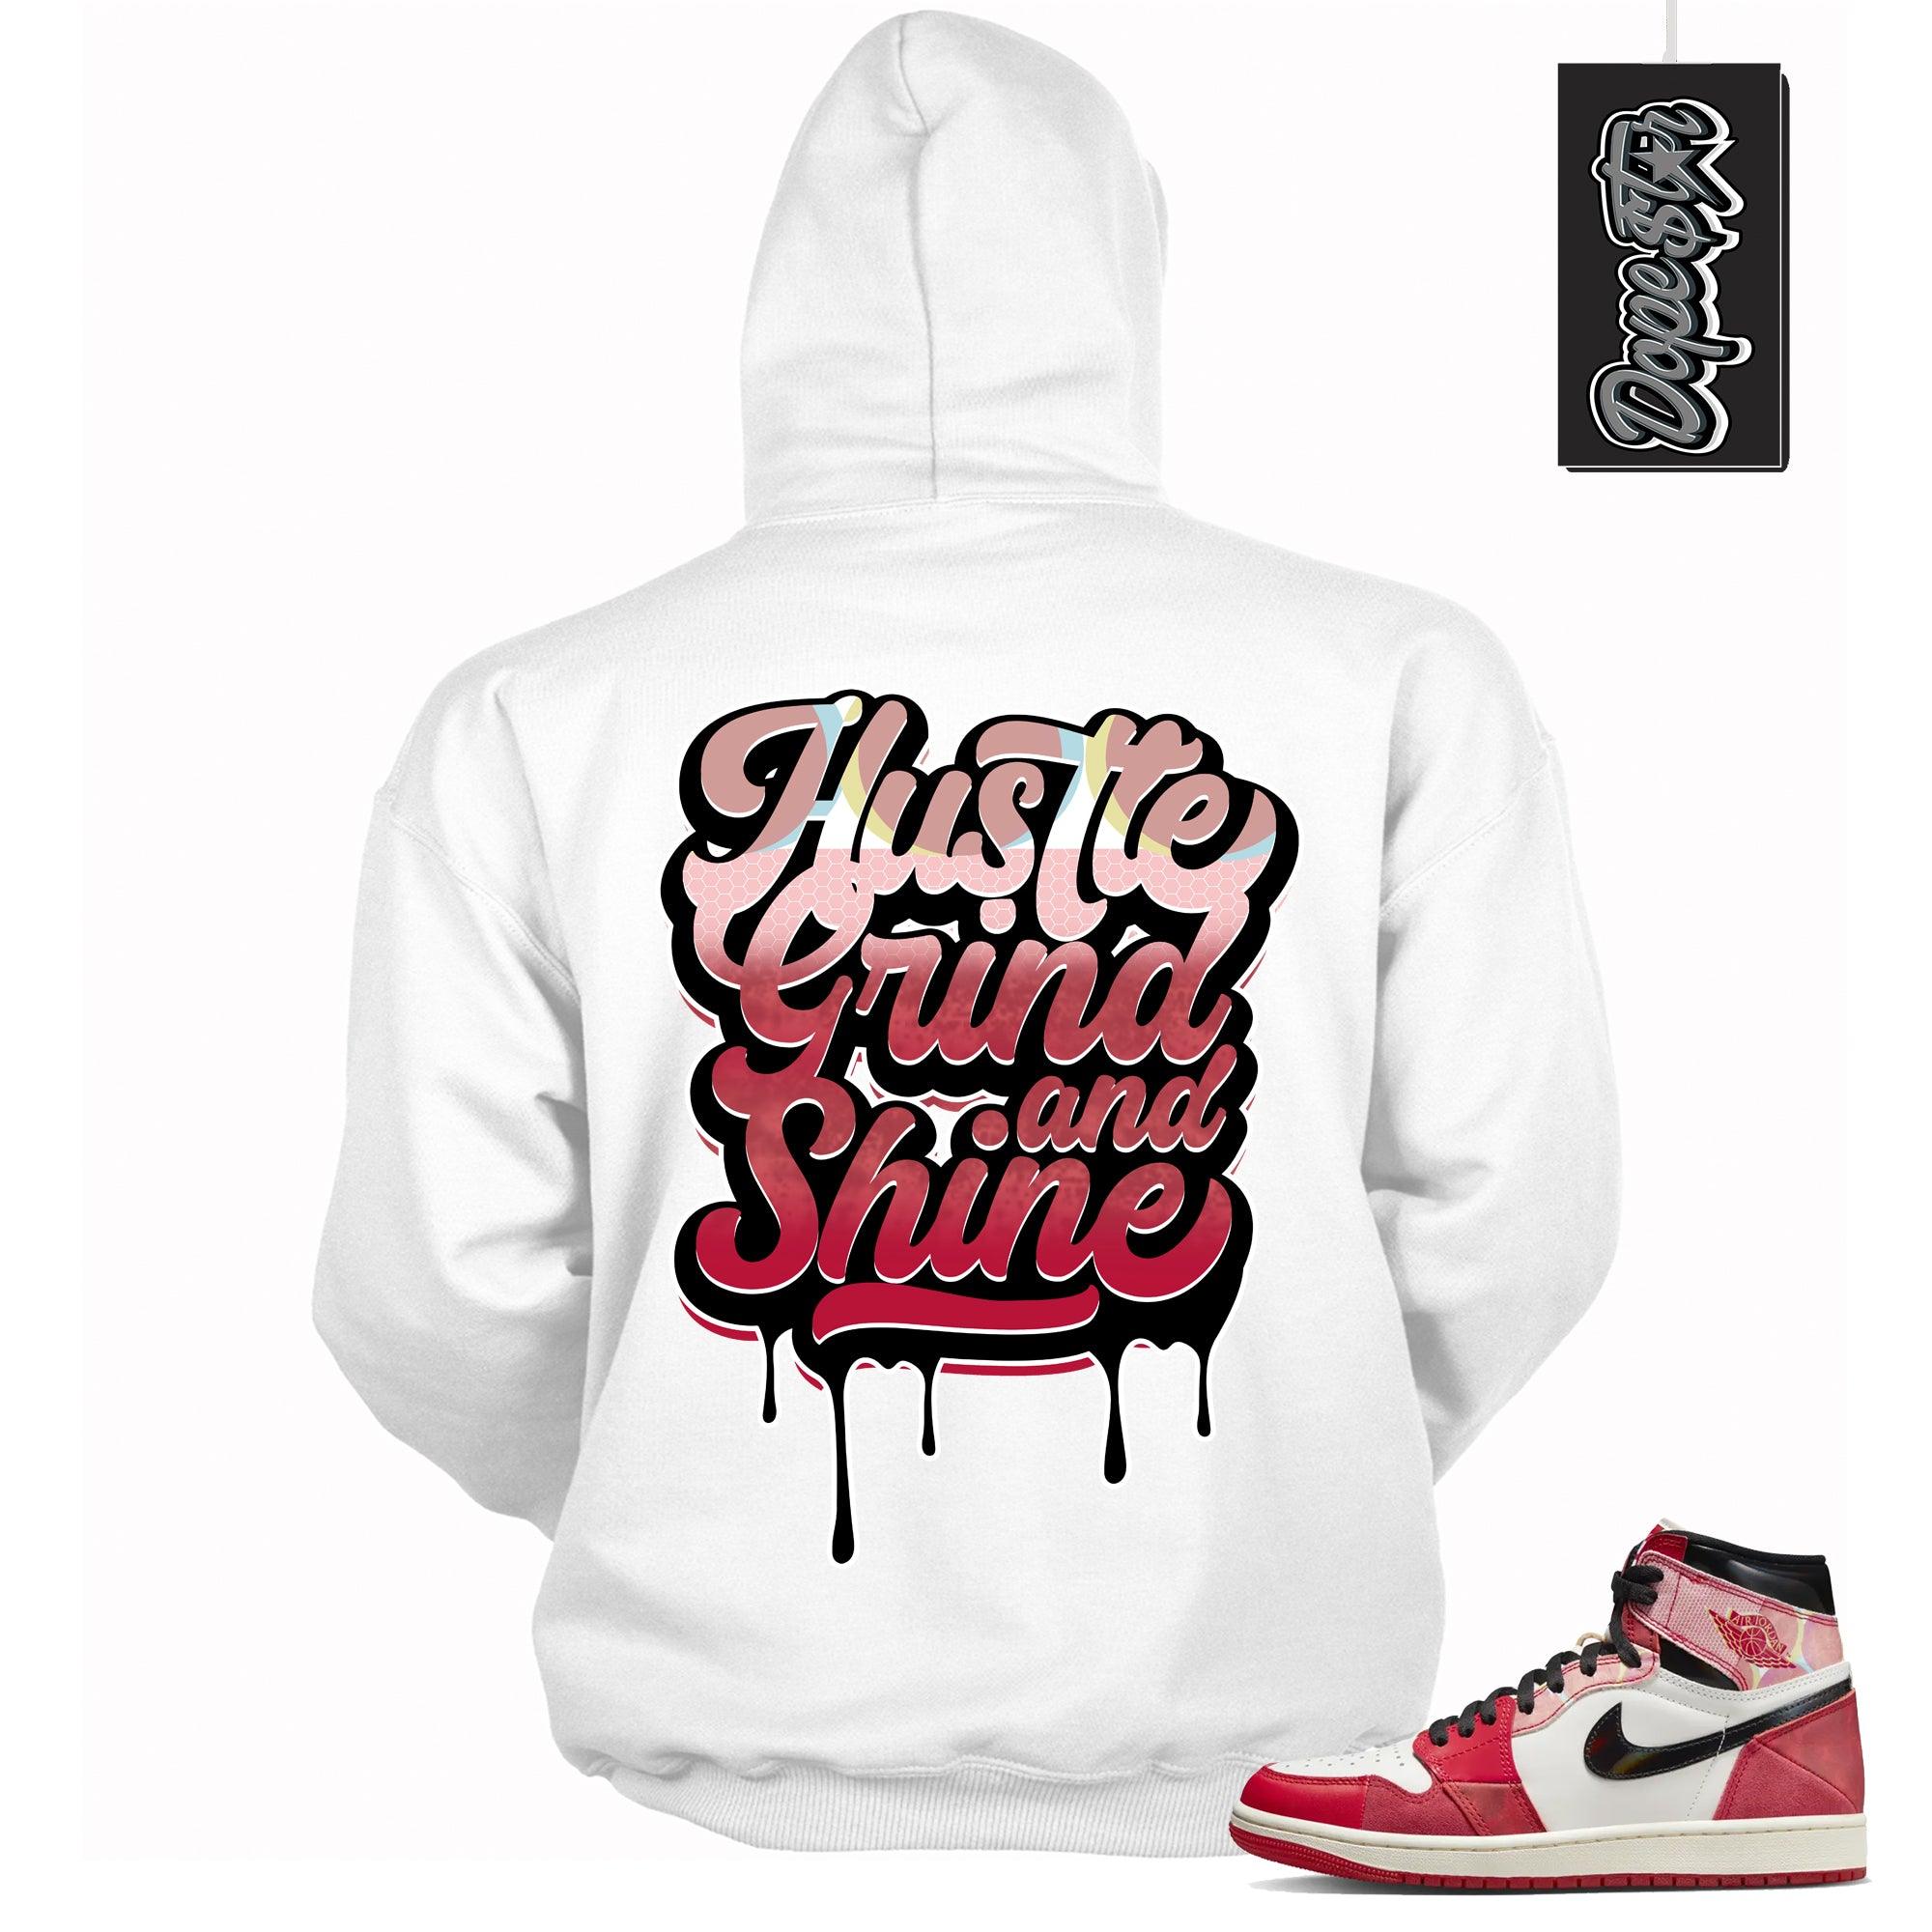 Cool White Graphic Hoodie with “ Hustle Grind And Shine “ print, that perfectly matches AIR JORDAN 1 Retro High OG NEXT CHAPTER SPIDER-VERSE sneakers